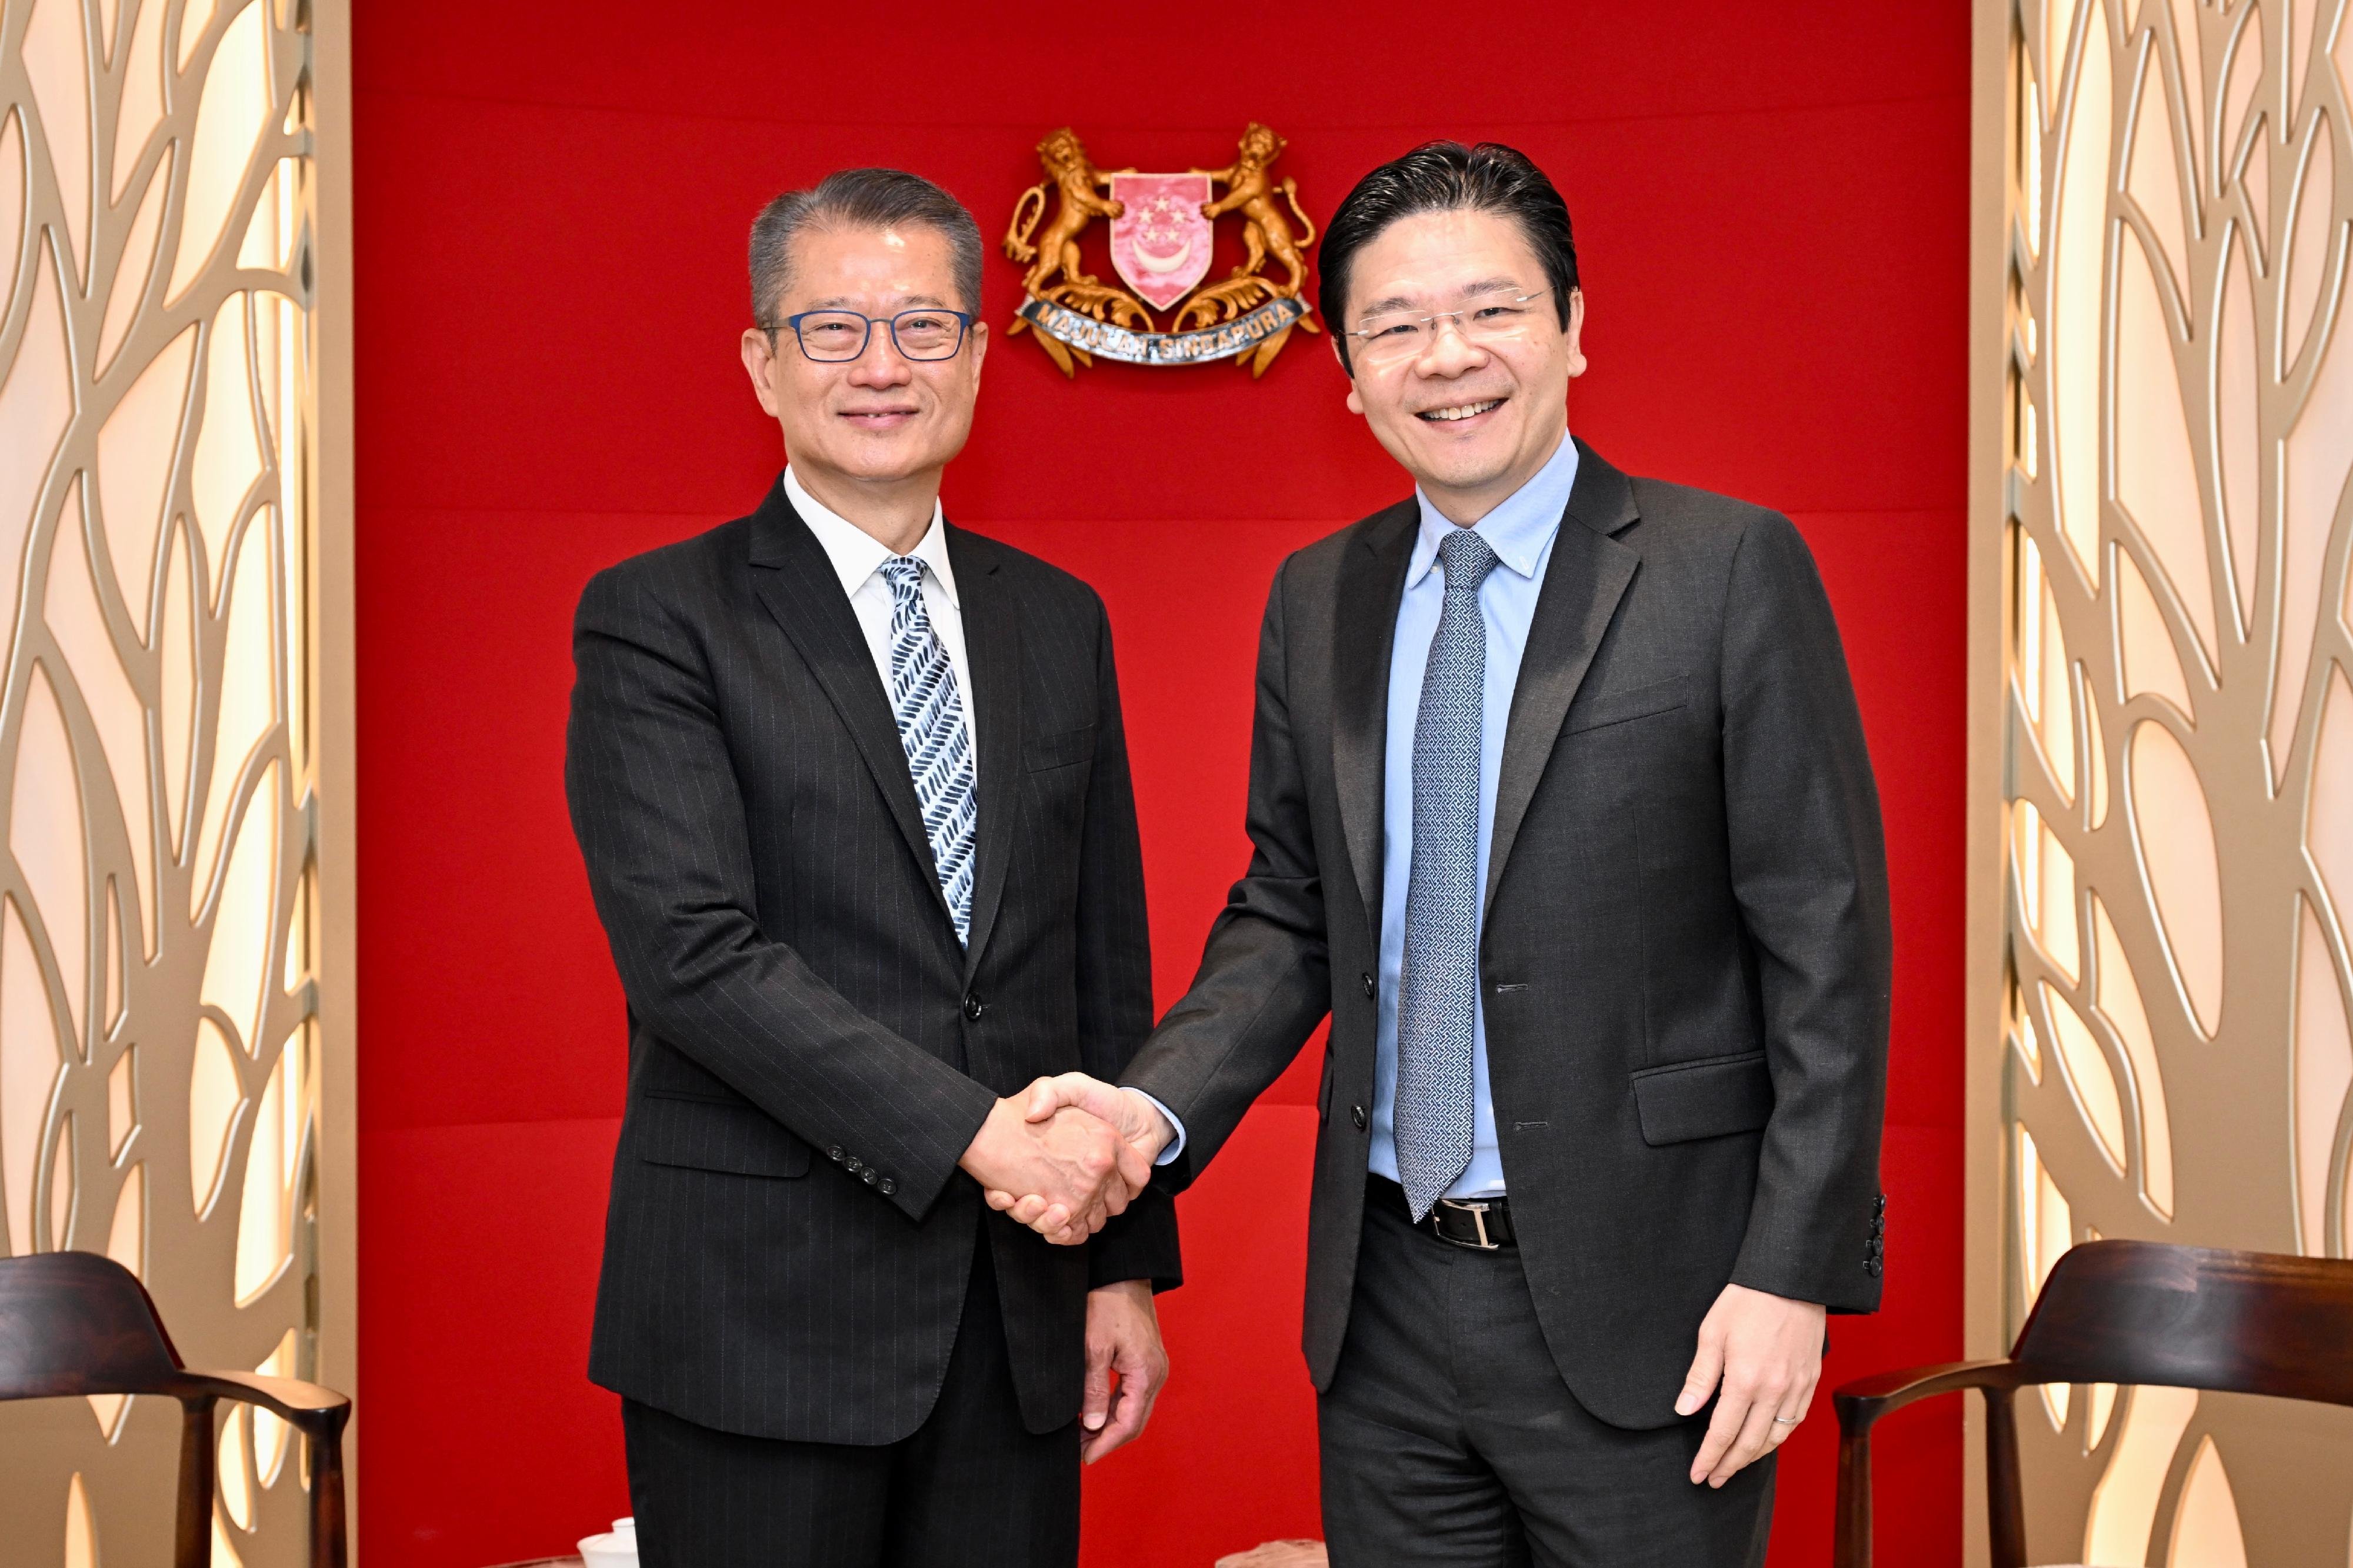 The Financial Secretary, Mr Paul Chan, started his visit programme in Singapore on March 29. Photo shows Mr Chan (left) meeting with the Deputy Prime Minister and Minister for Finance of Singapore, Mr Lawrence Wong (right).

